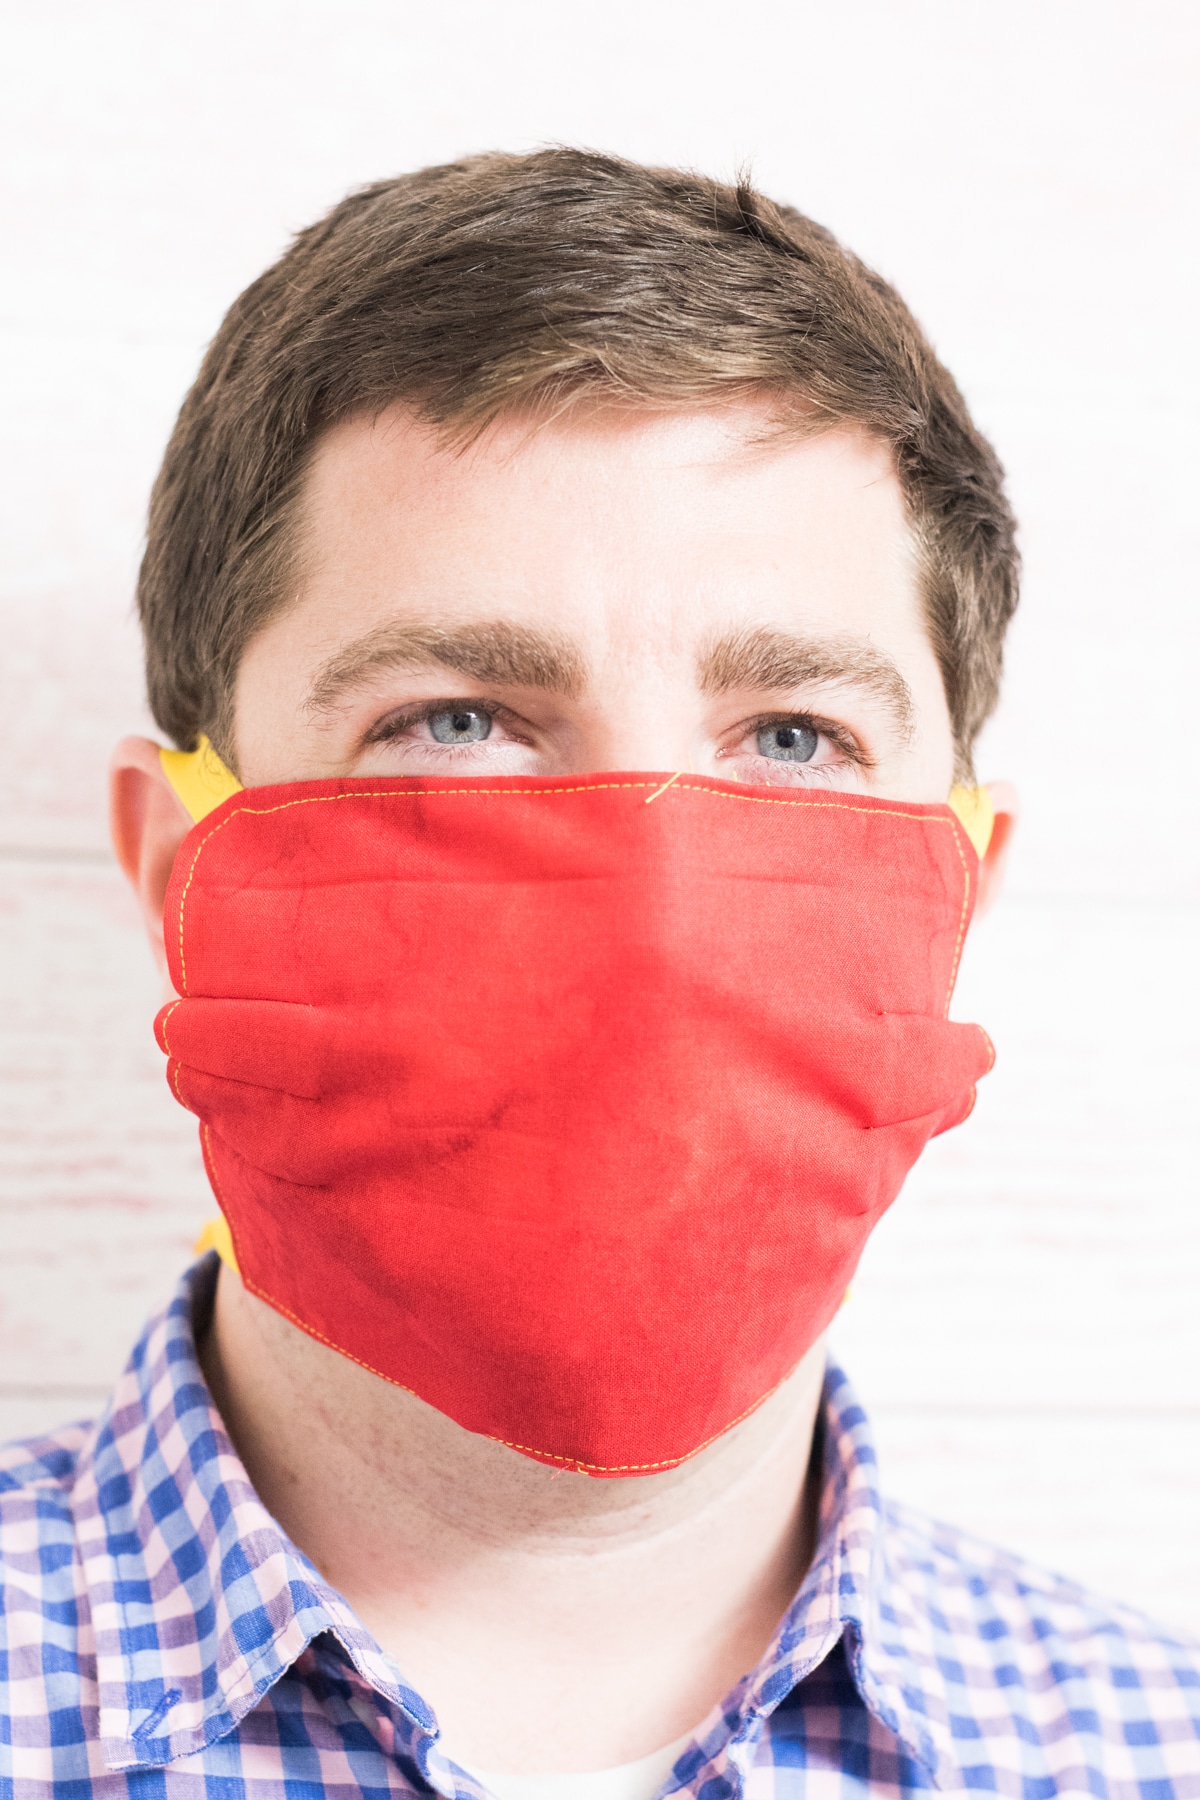 A close up of a man wearing a red mask and blue shirt